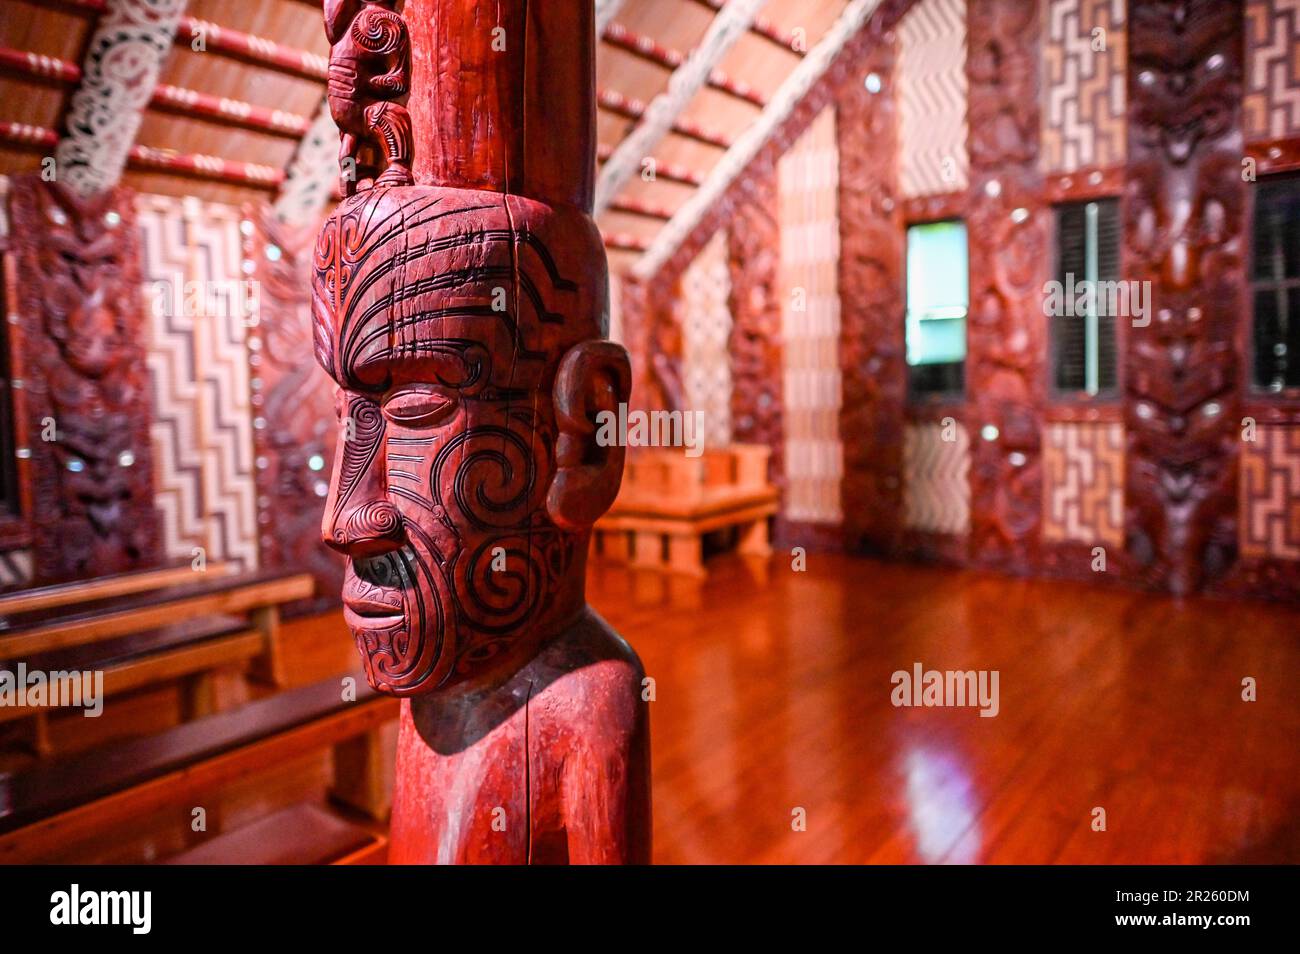 The ceremonial house at Waitangi is called the Whare Rūnanga. It is a significant structure located within the Waitangi Treaty Grounds in New Zealand. The Whare Rūnanga serves as a symbol of partnership and unity between Māori and the British Crown.  The Whare Rūnanga is a traditional Māori meeting house built in the style of a carved wharenui (large house). It was constructed in 1940 to commemorate the centenary of the signing of the Treaty of Waitangi Stock Photo